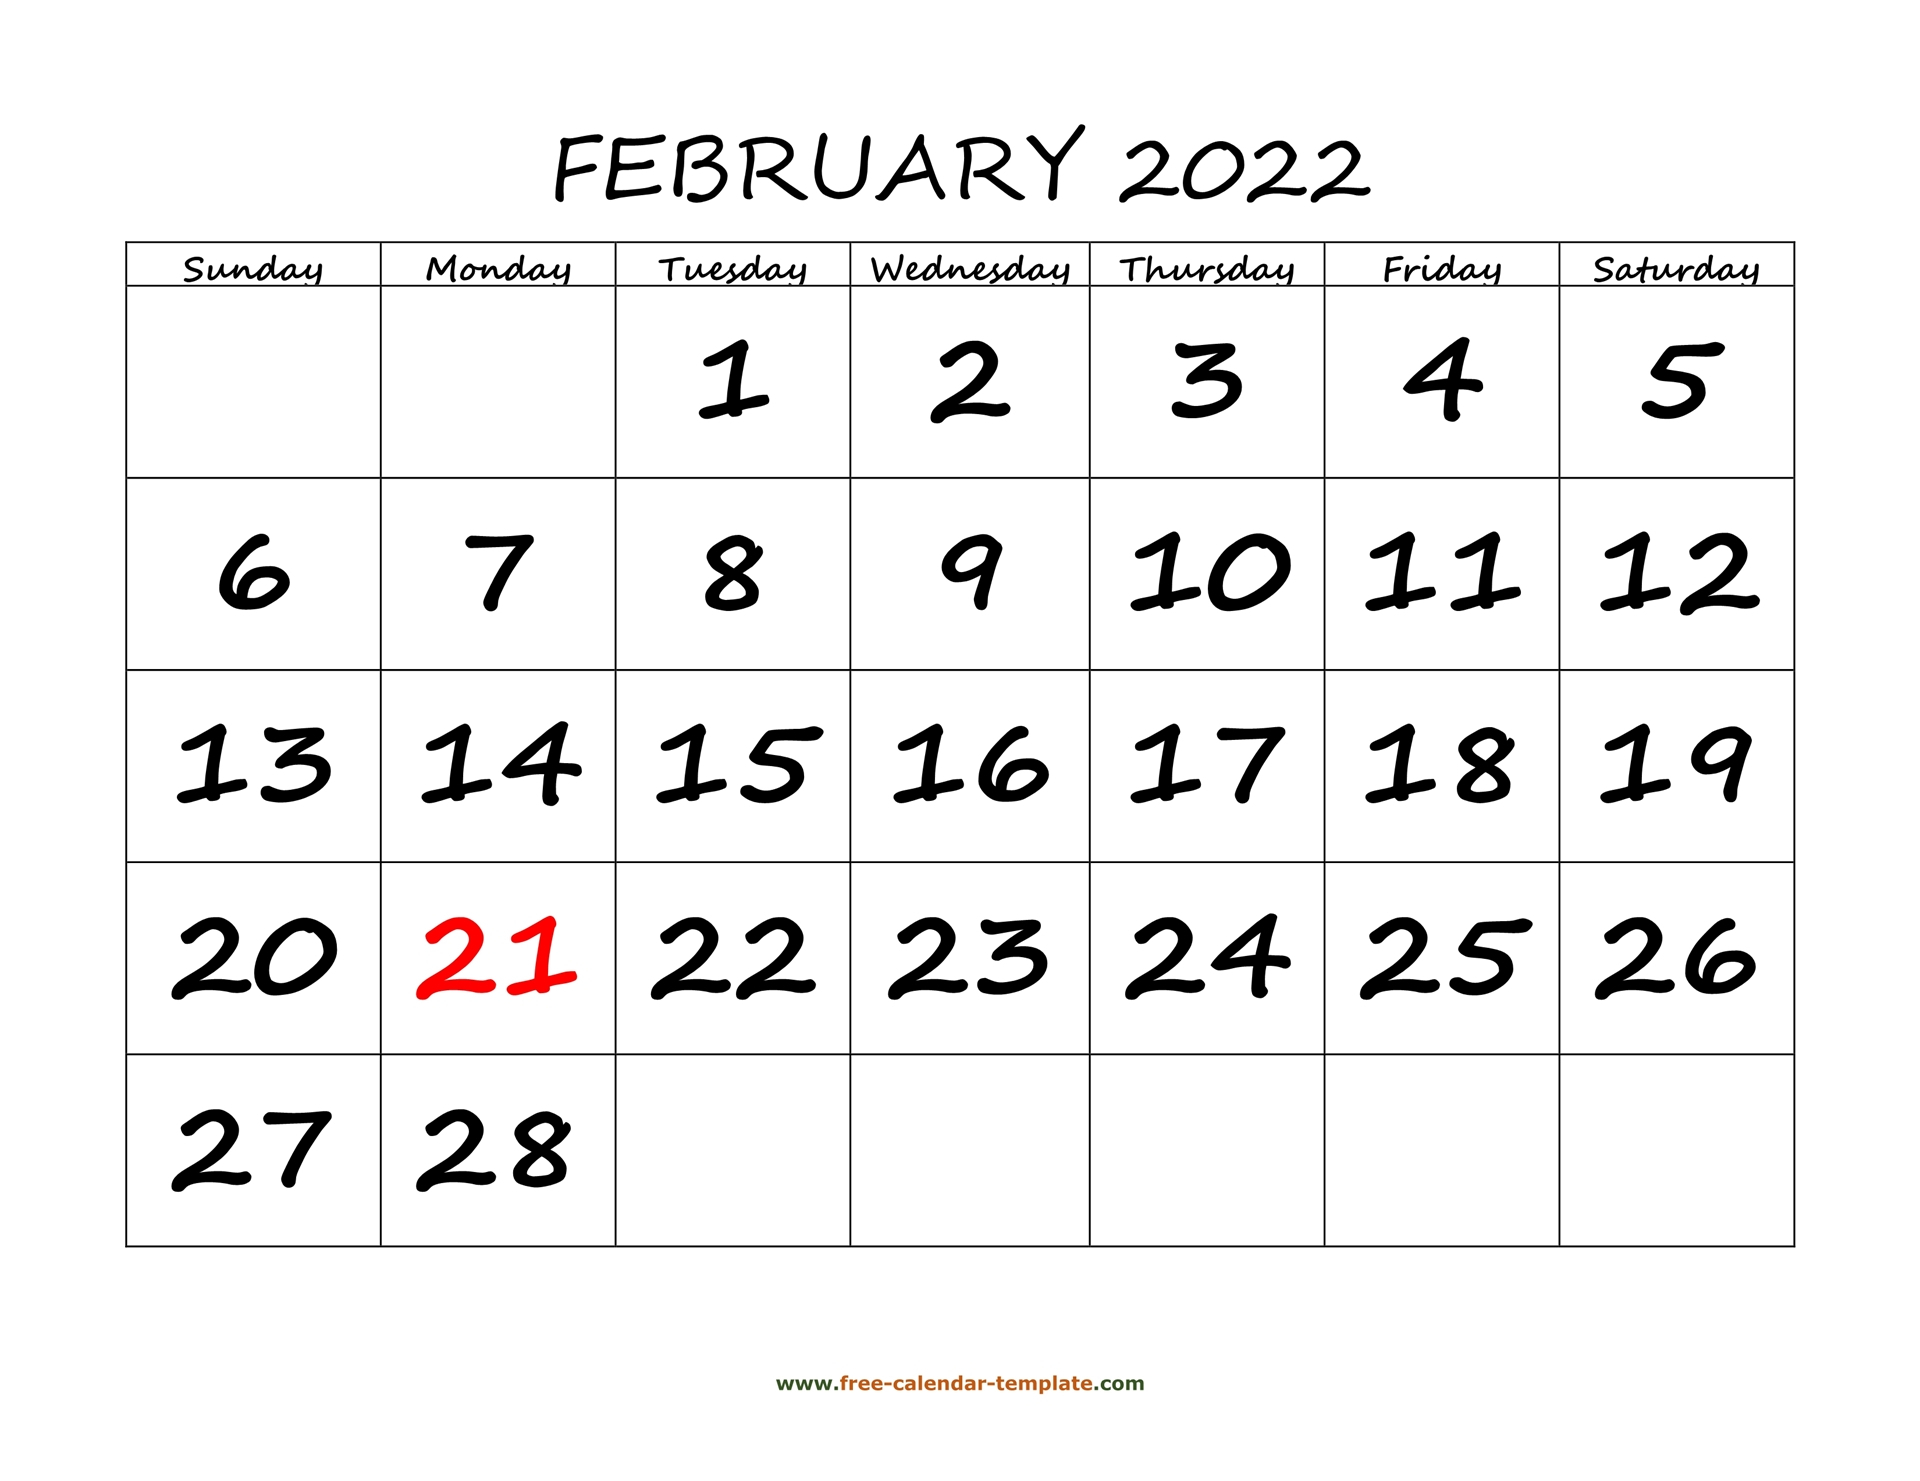 February 2022 Calendar Designed With Large Font